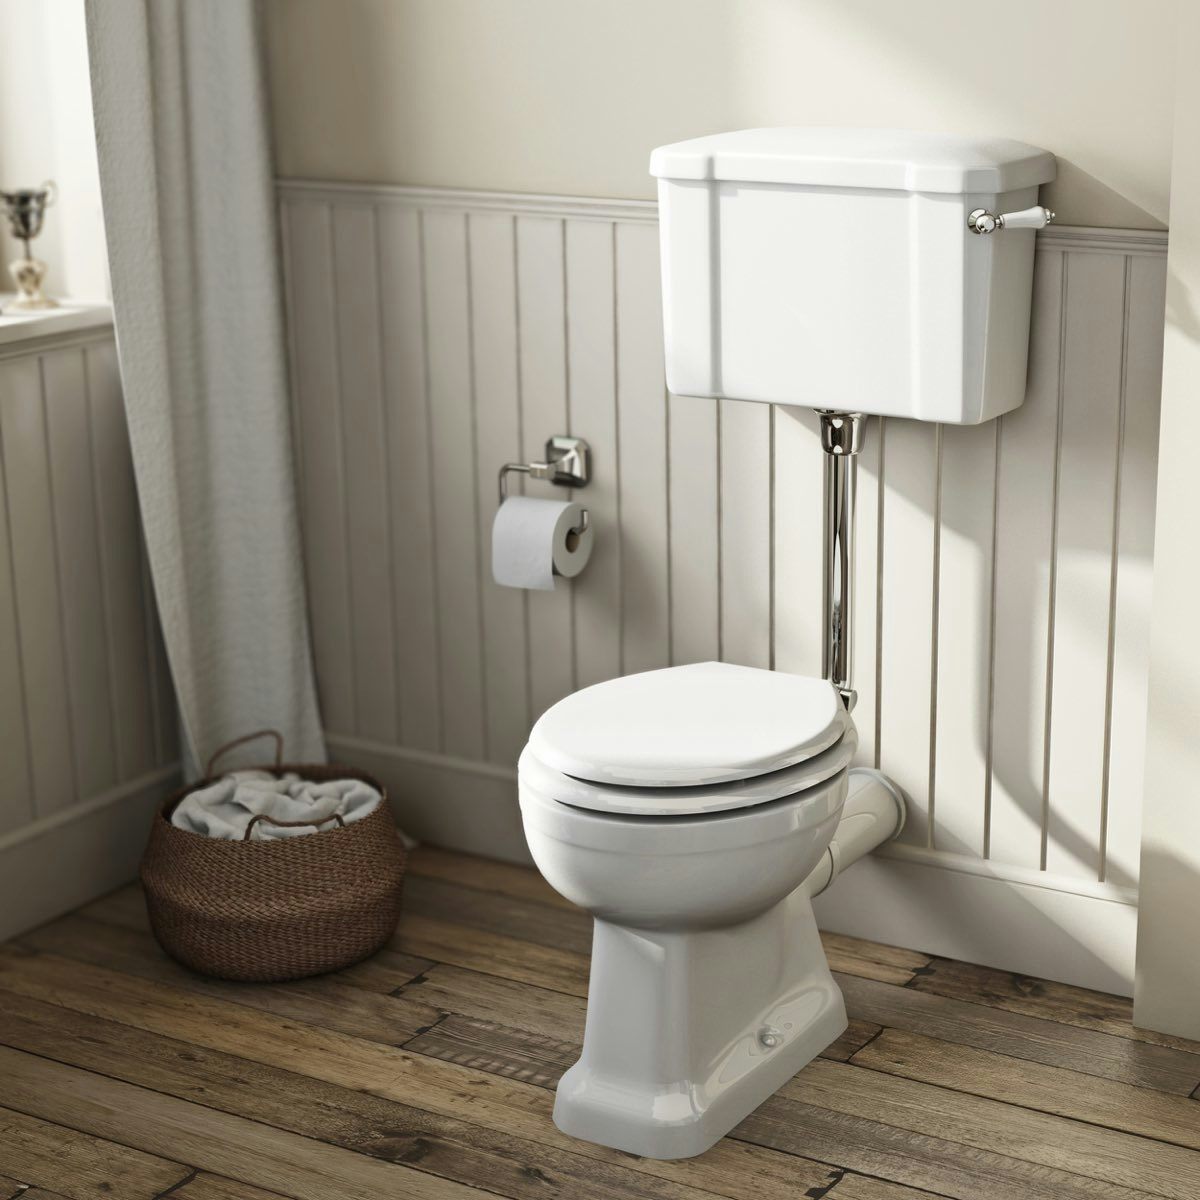 A low level cistern toilet